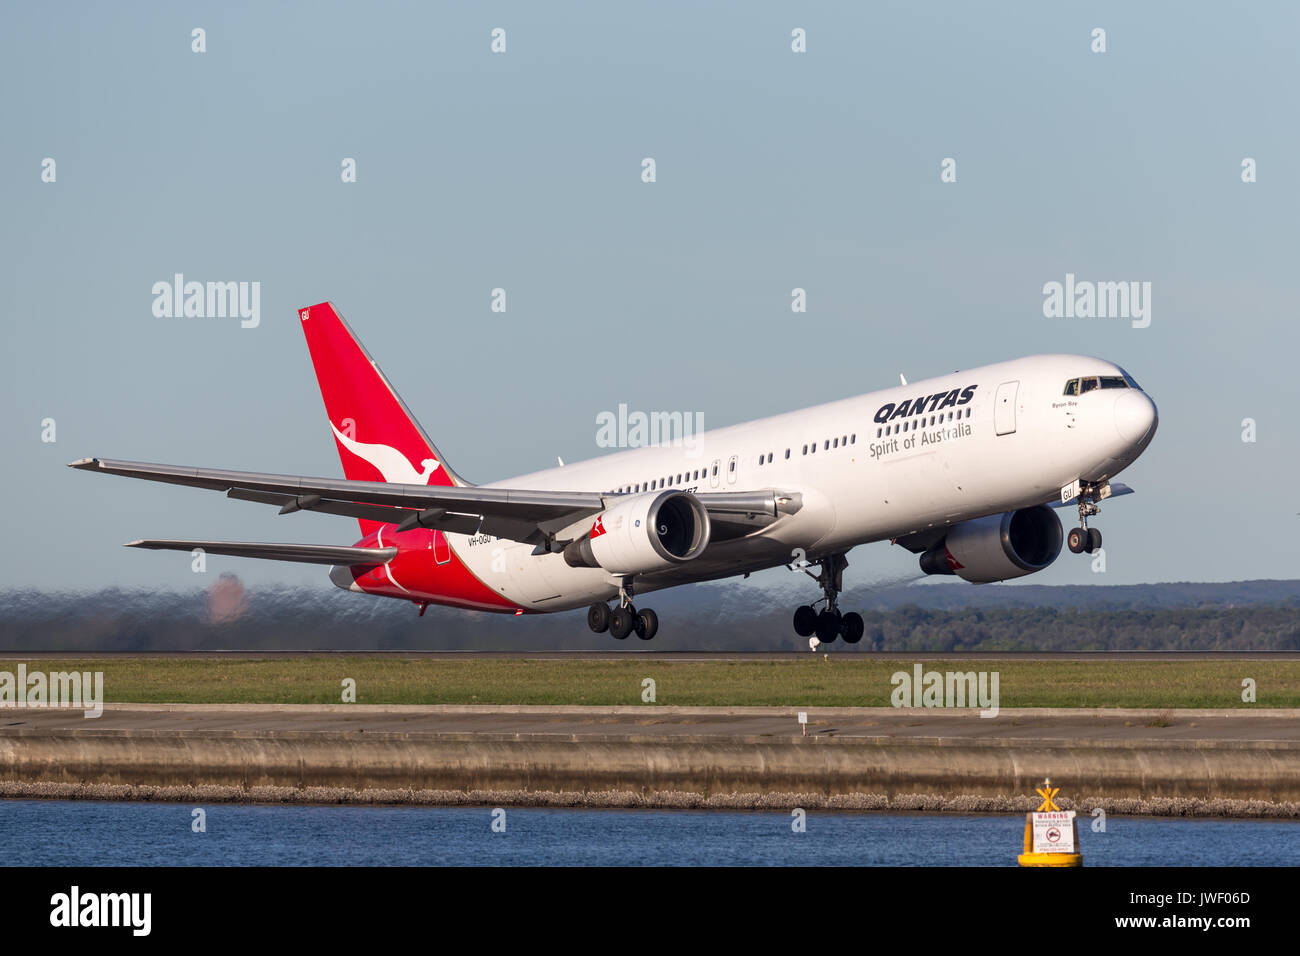 Qantas Boeing 767 airliner taking off from Sydney Airport. Stock Photo